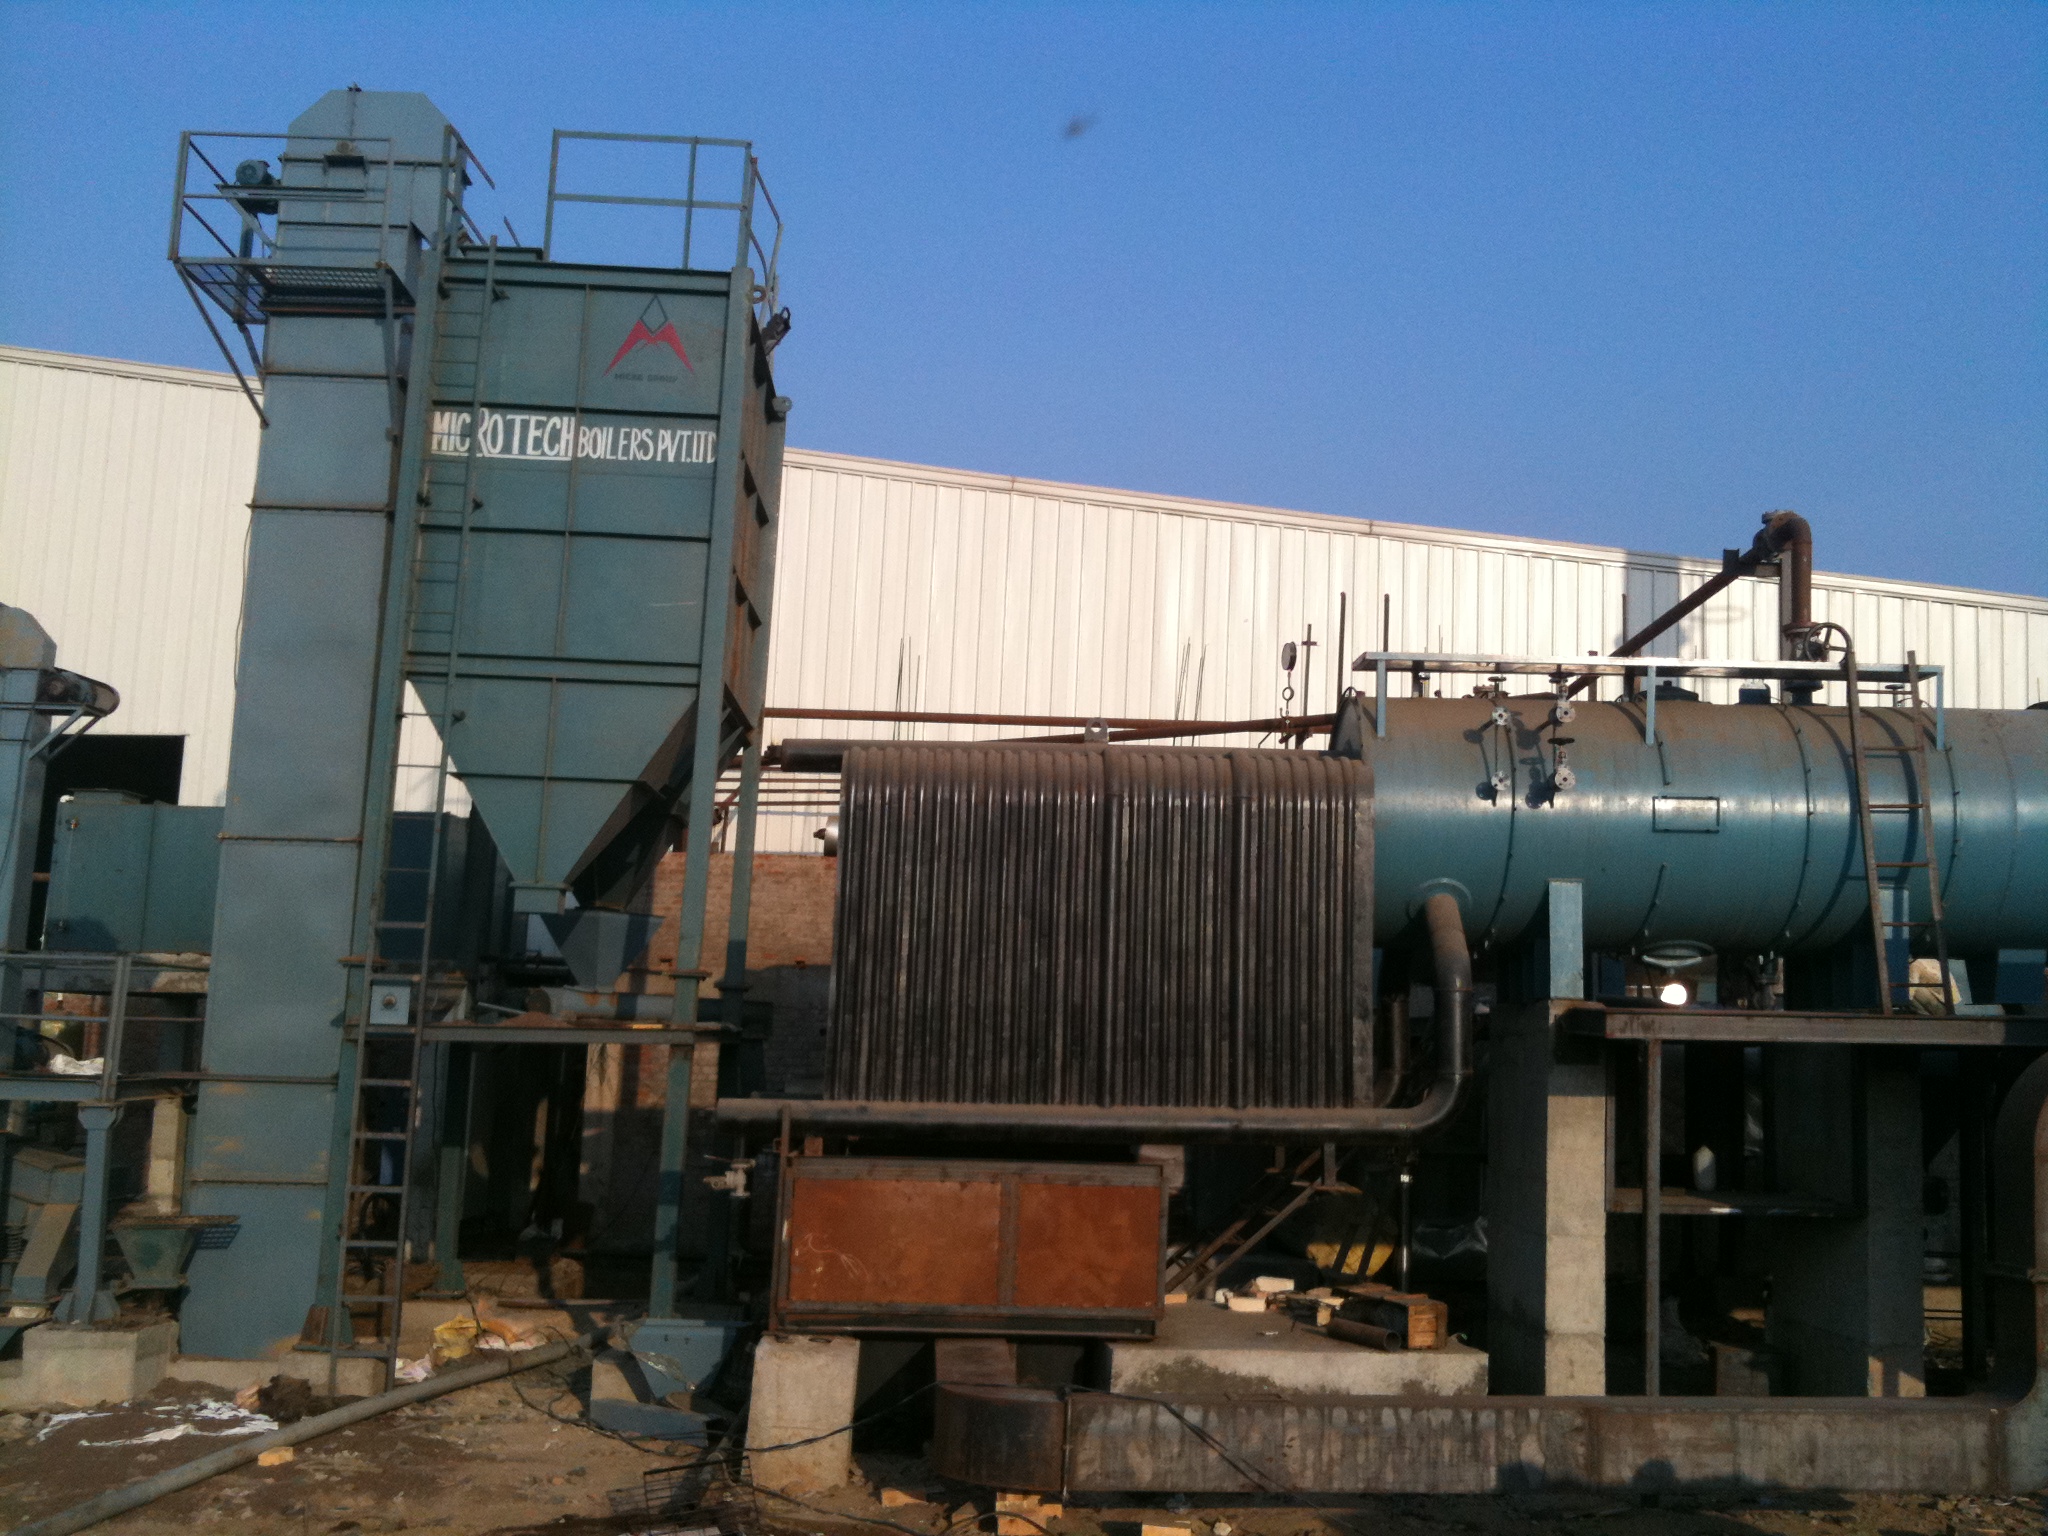 FBC Boiler India, Fluid Bed Combustion Boiler, Atmospheric Fluidized Bed Combustion Boiler, Circulating Fluidized Bed Boiler,Manufacturers, Export & Suppliers From India